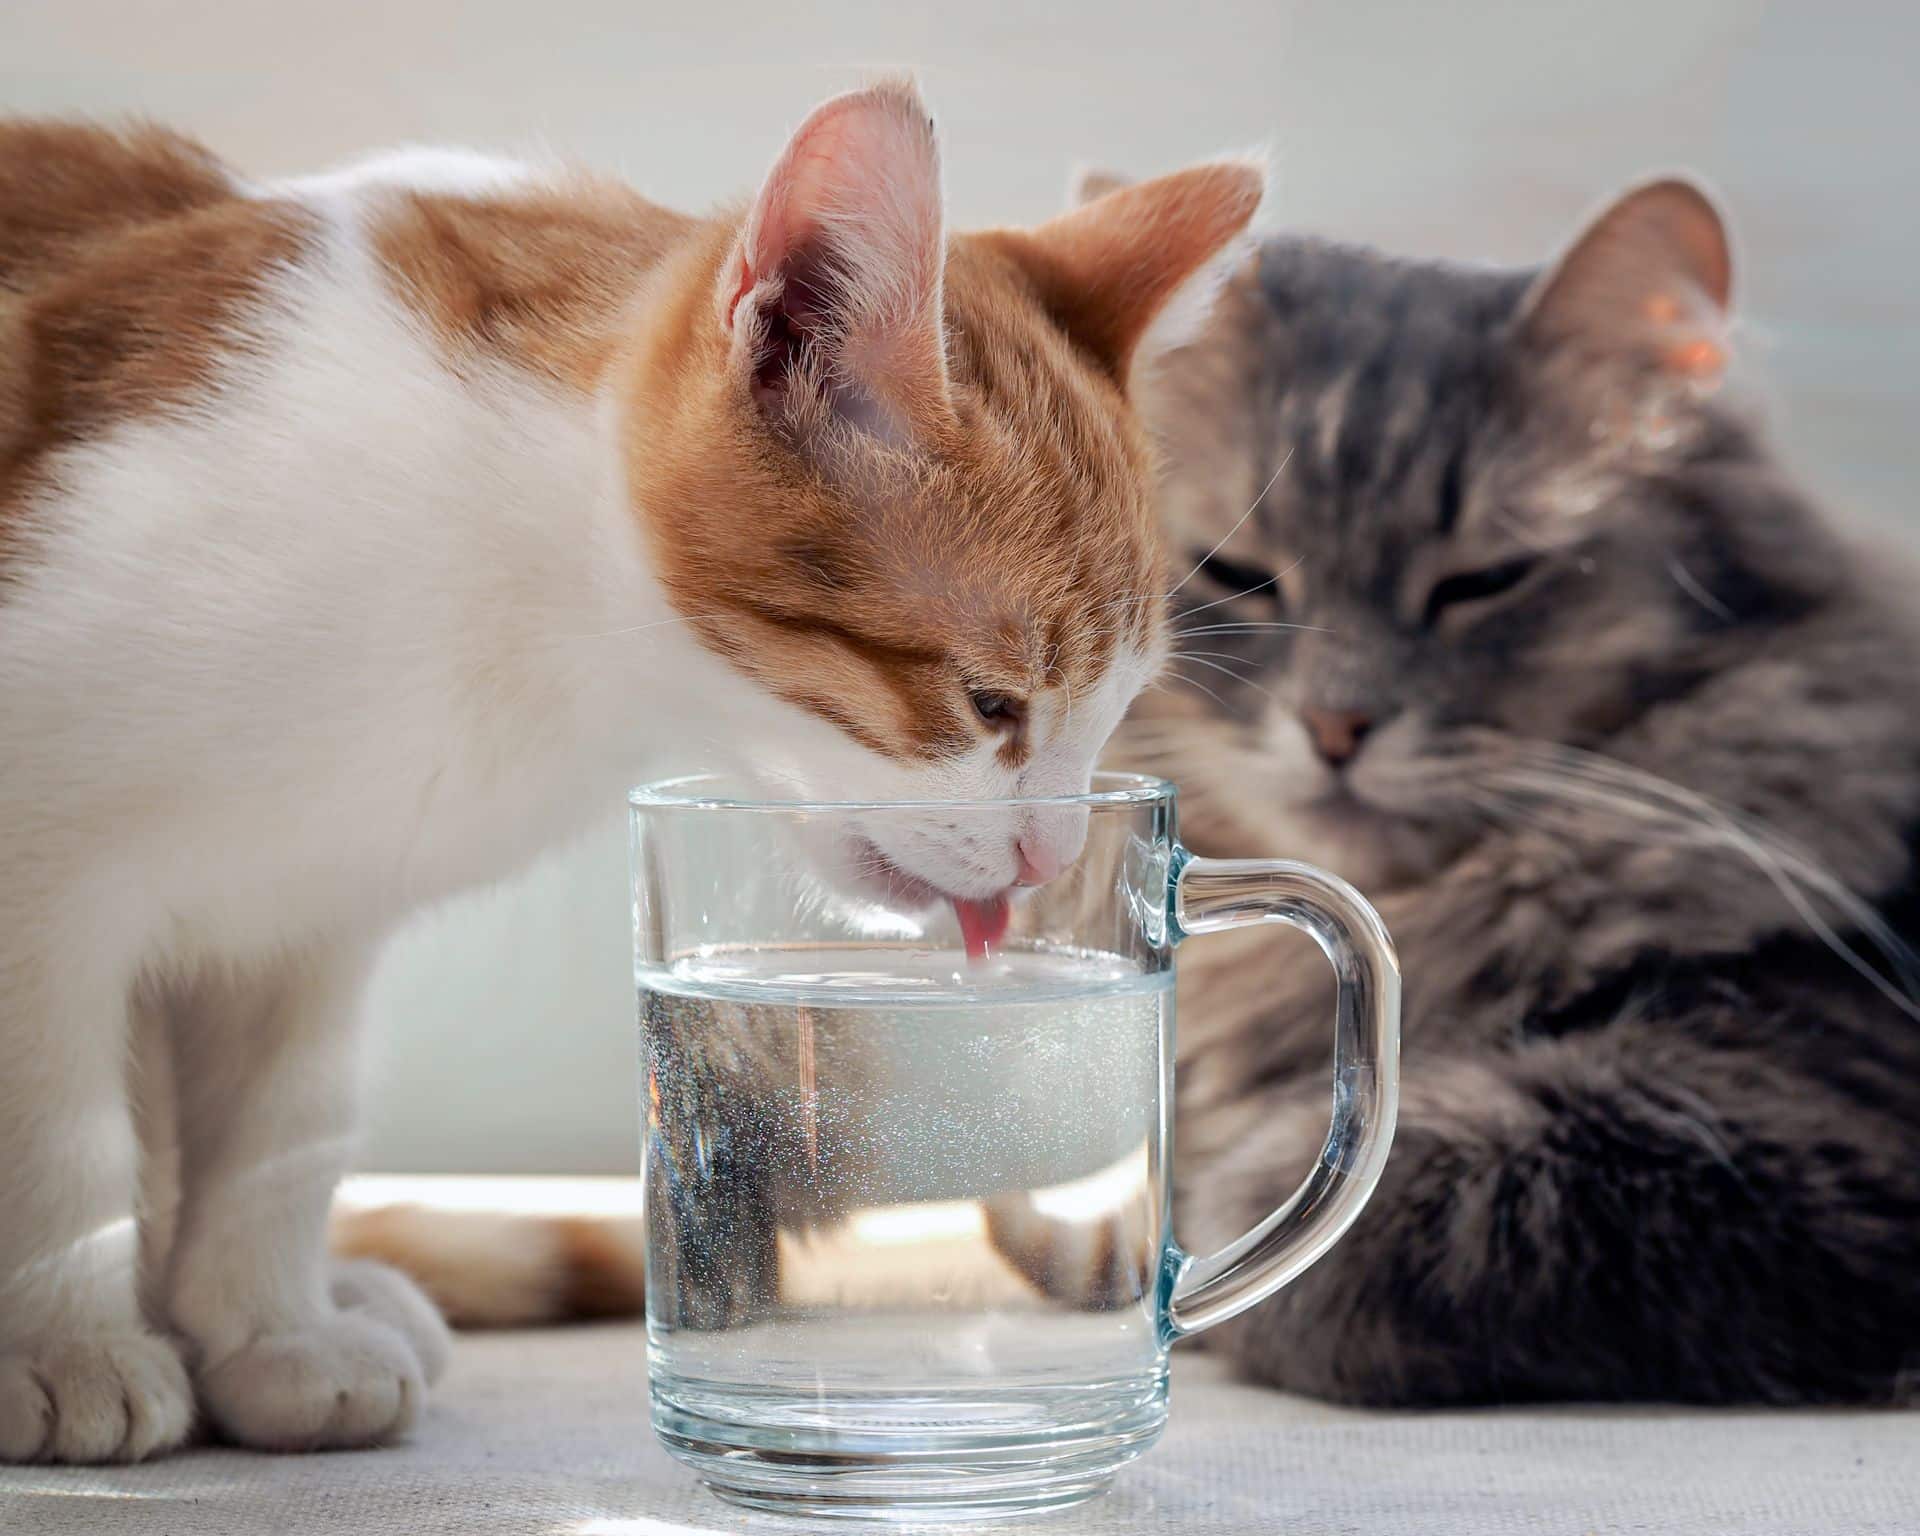 How to Help a Dehydrated Cat